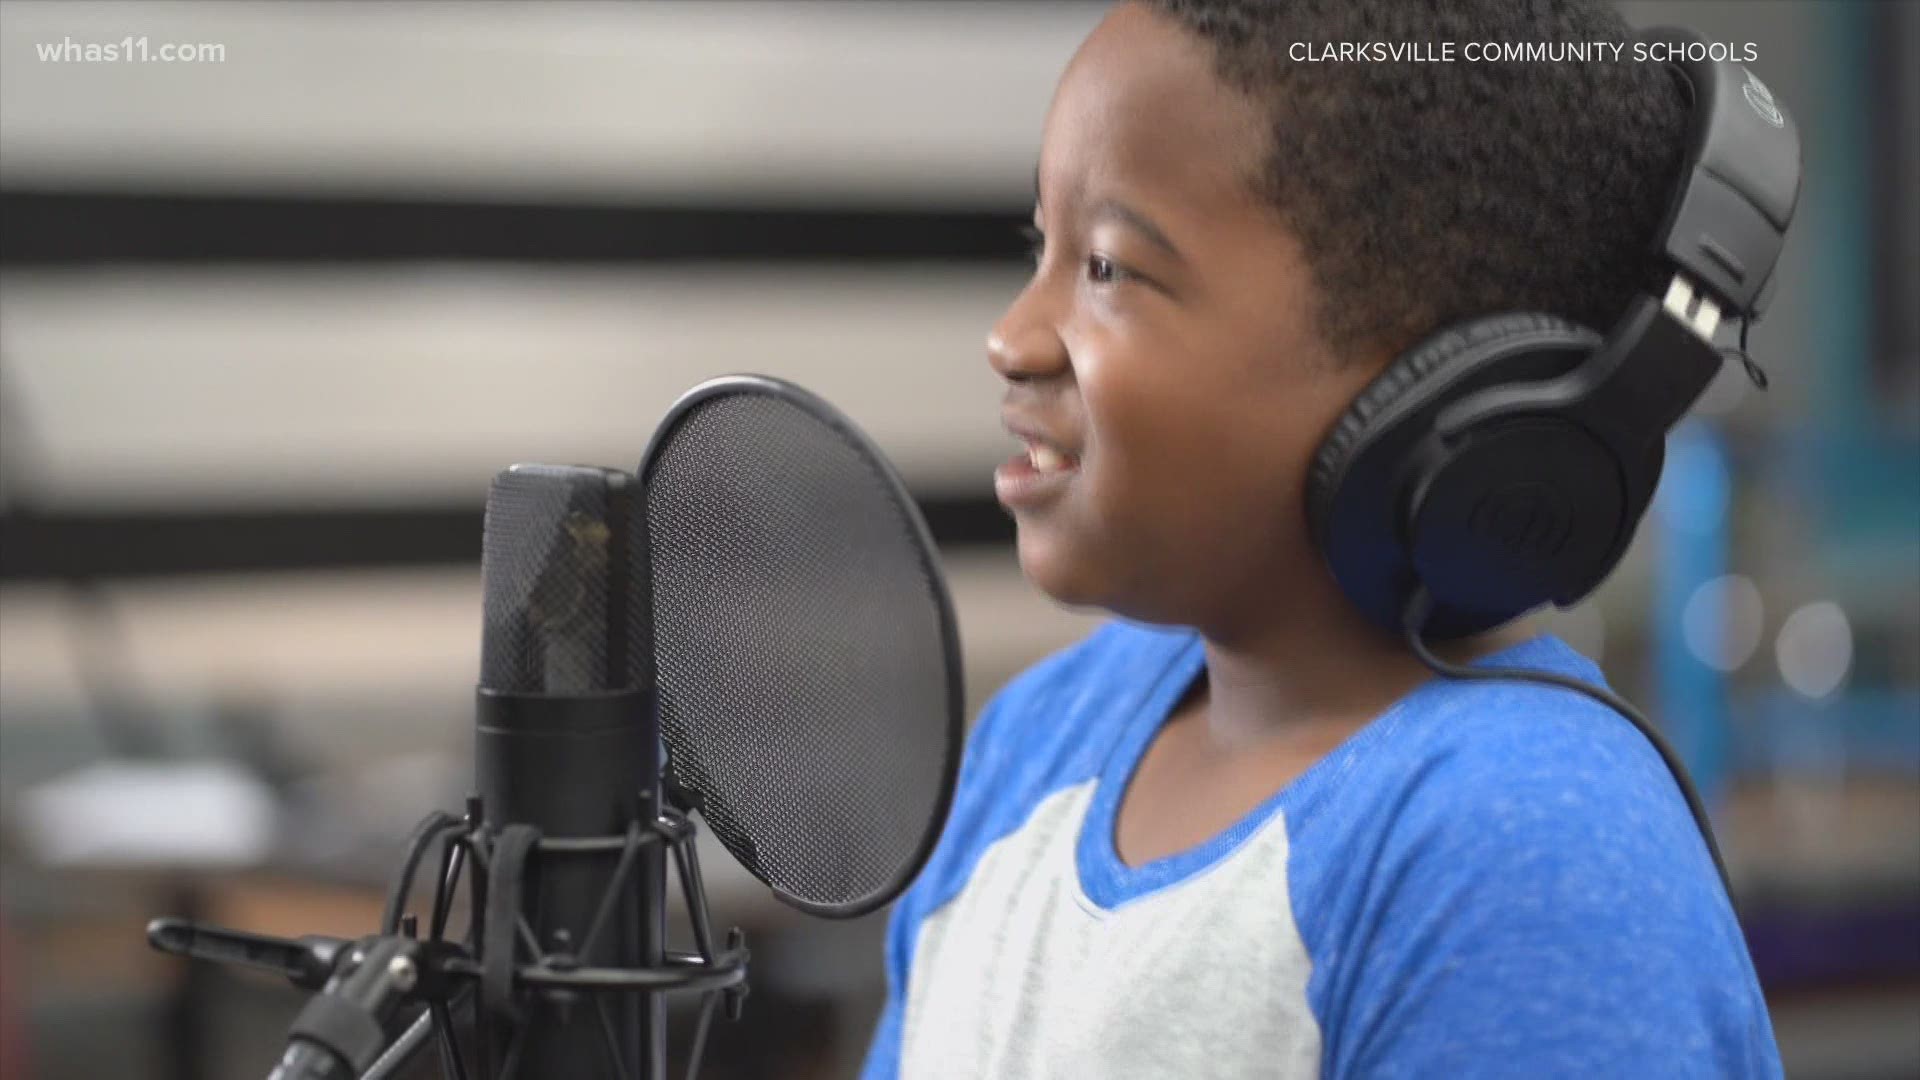 After a difficult school year impacted by COVID-19, the students at Clarksville Elementary School came together to sing a song to unite everyone.